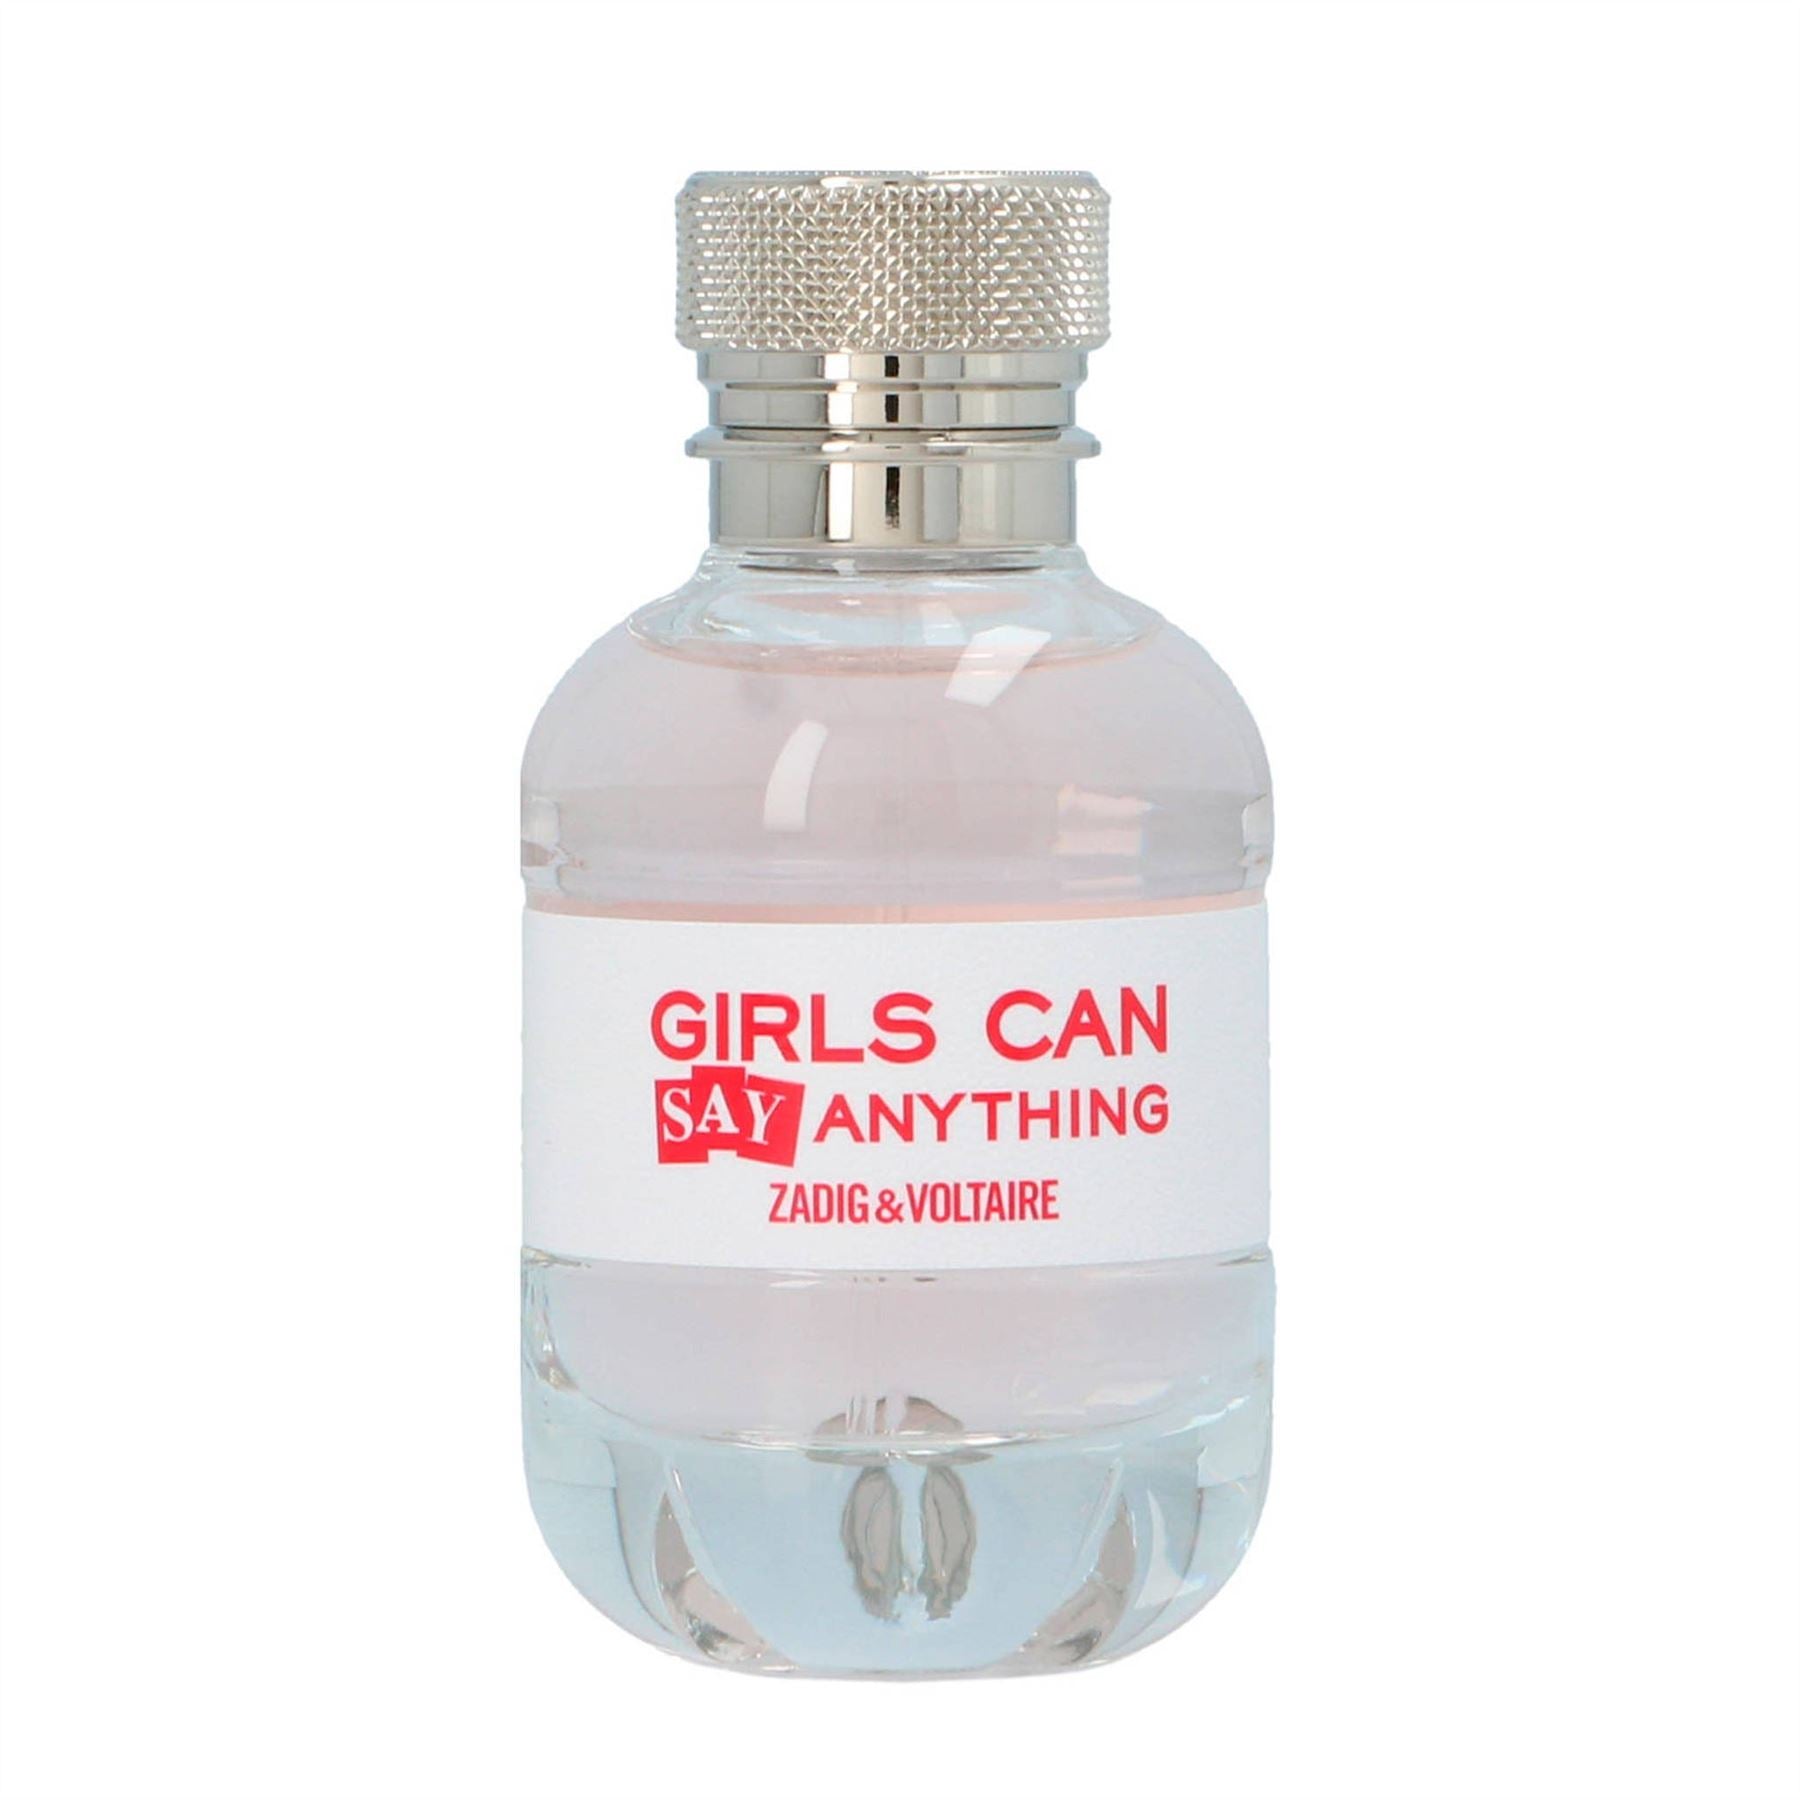 Zadig & Voltaire Girls Can Say Anything EDP 50ml בושם לאישה